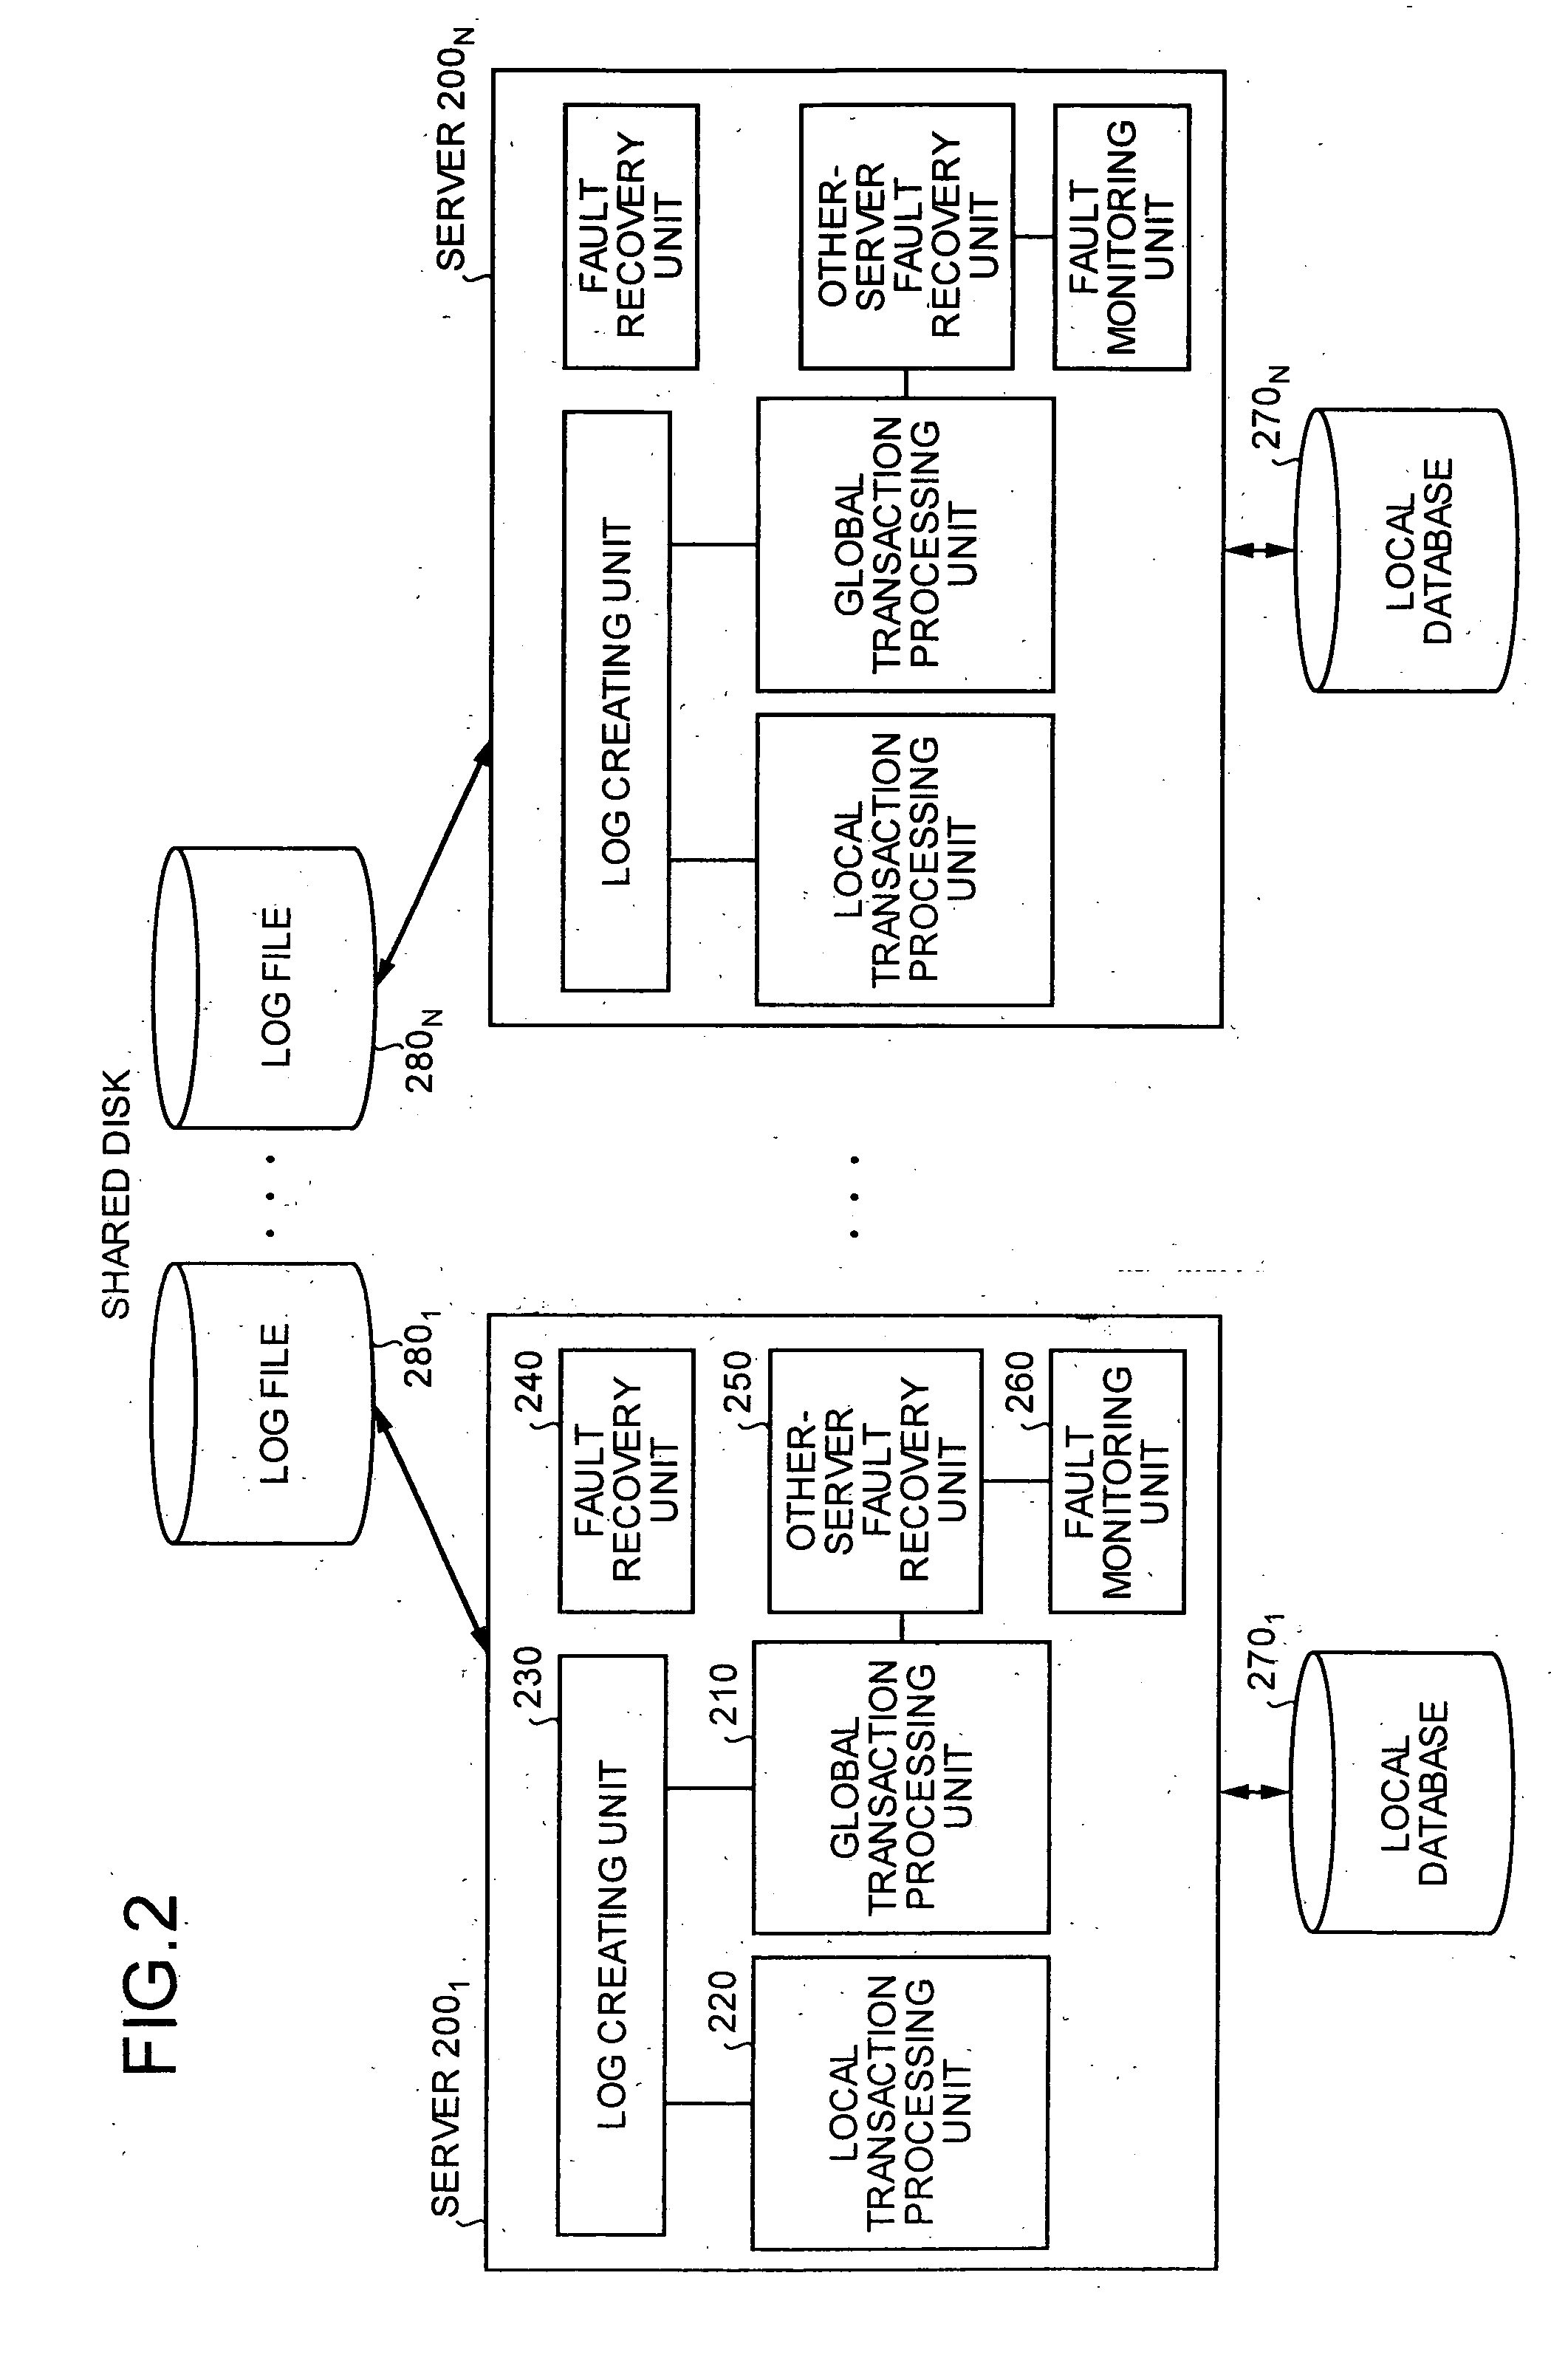 Distributed transaction processing control